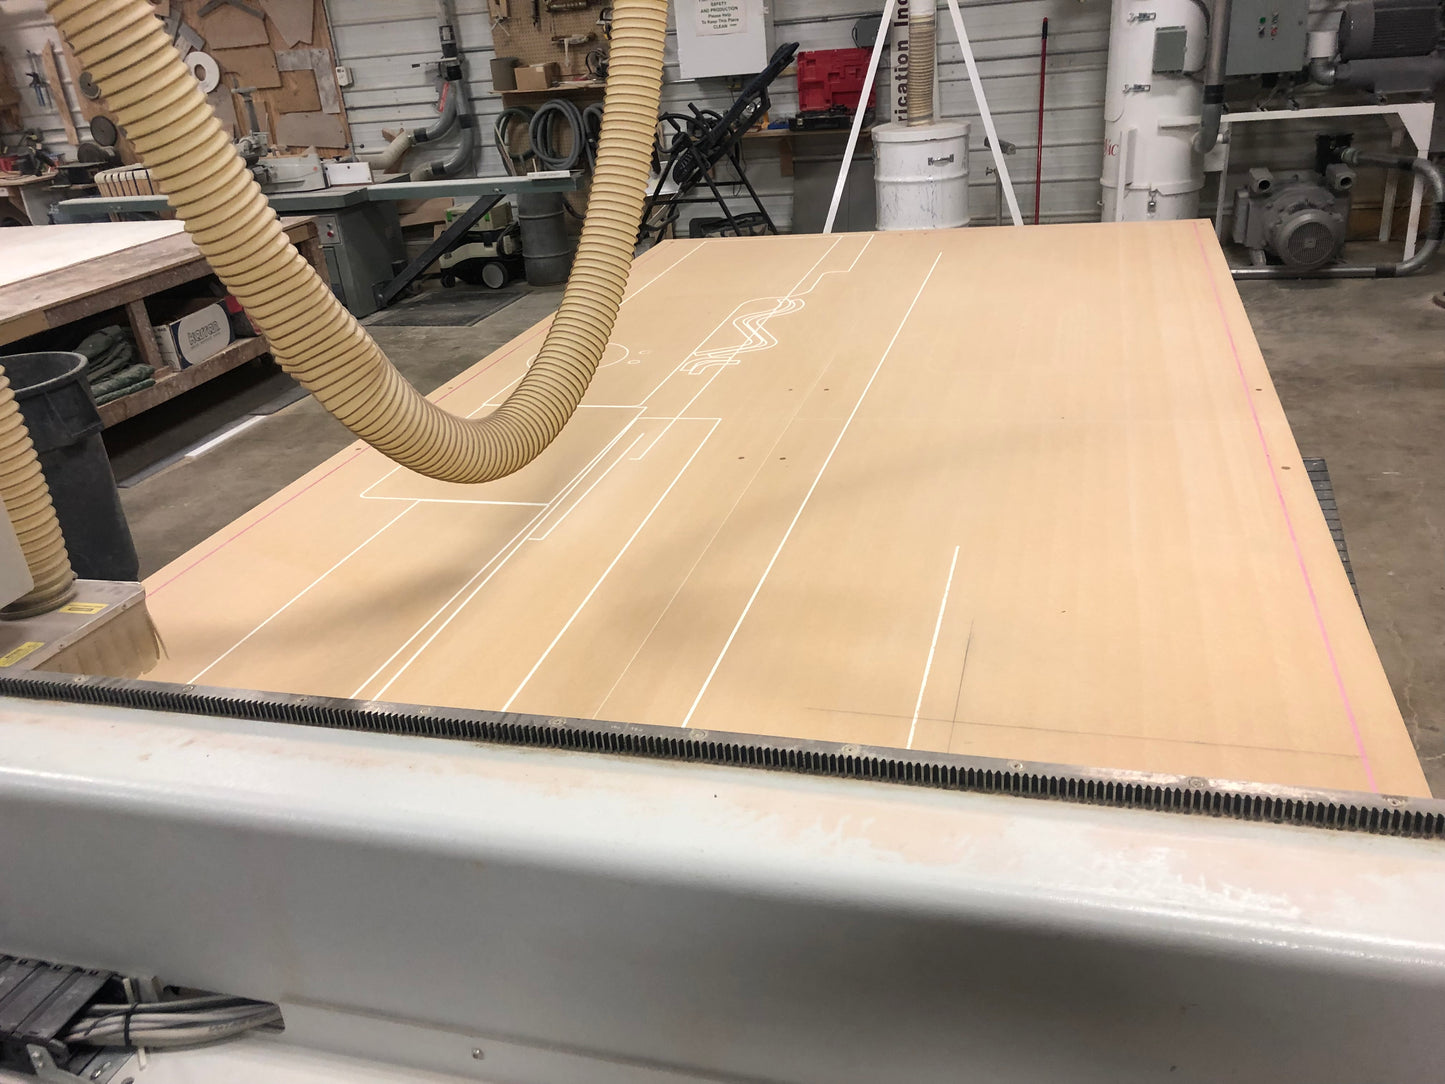 2006 Flexicam CNC Router with Vacuum and Dust Collection